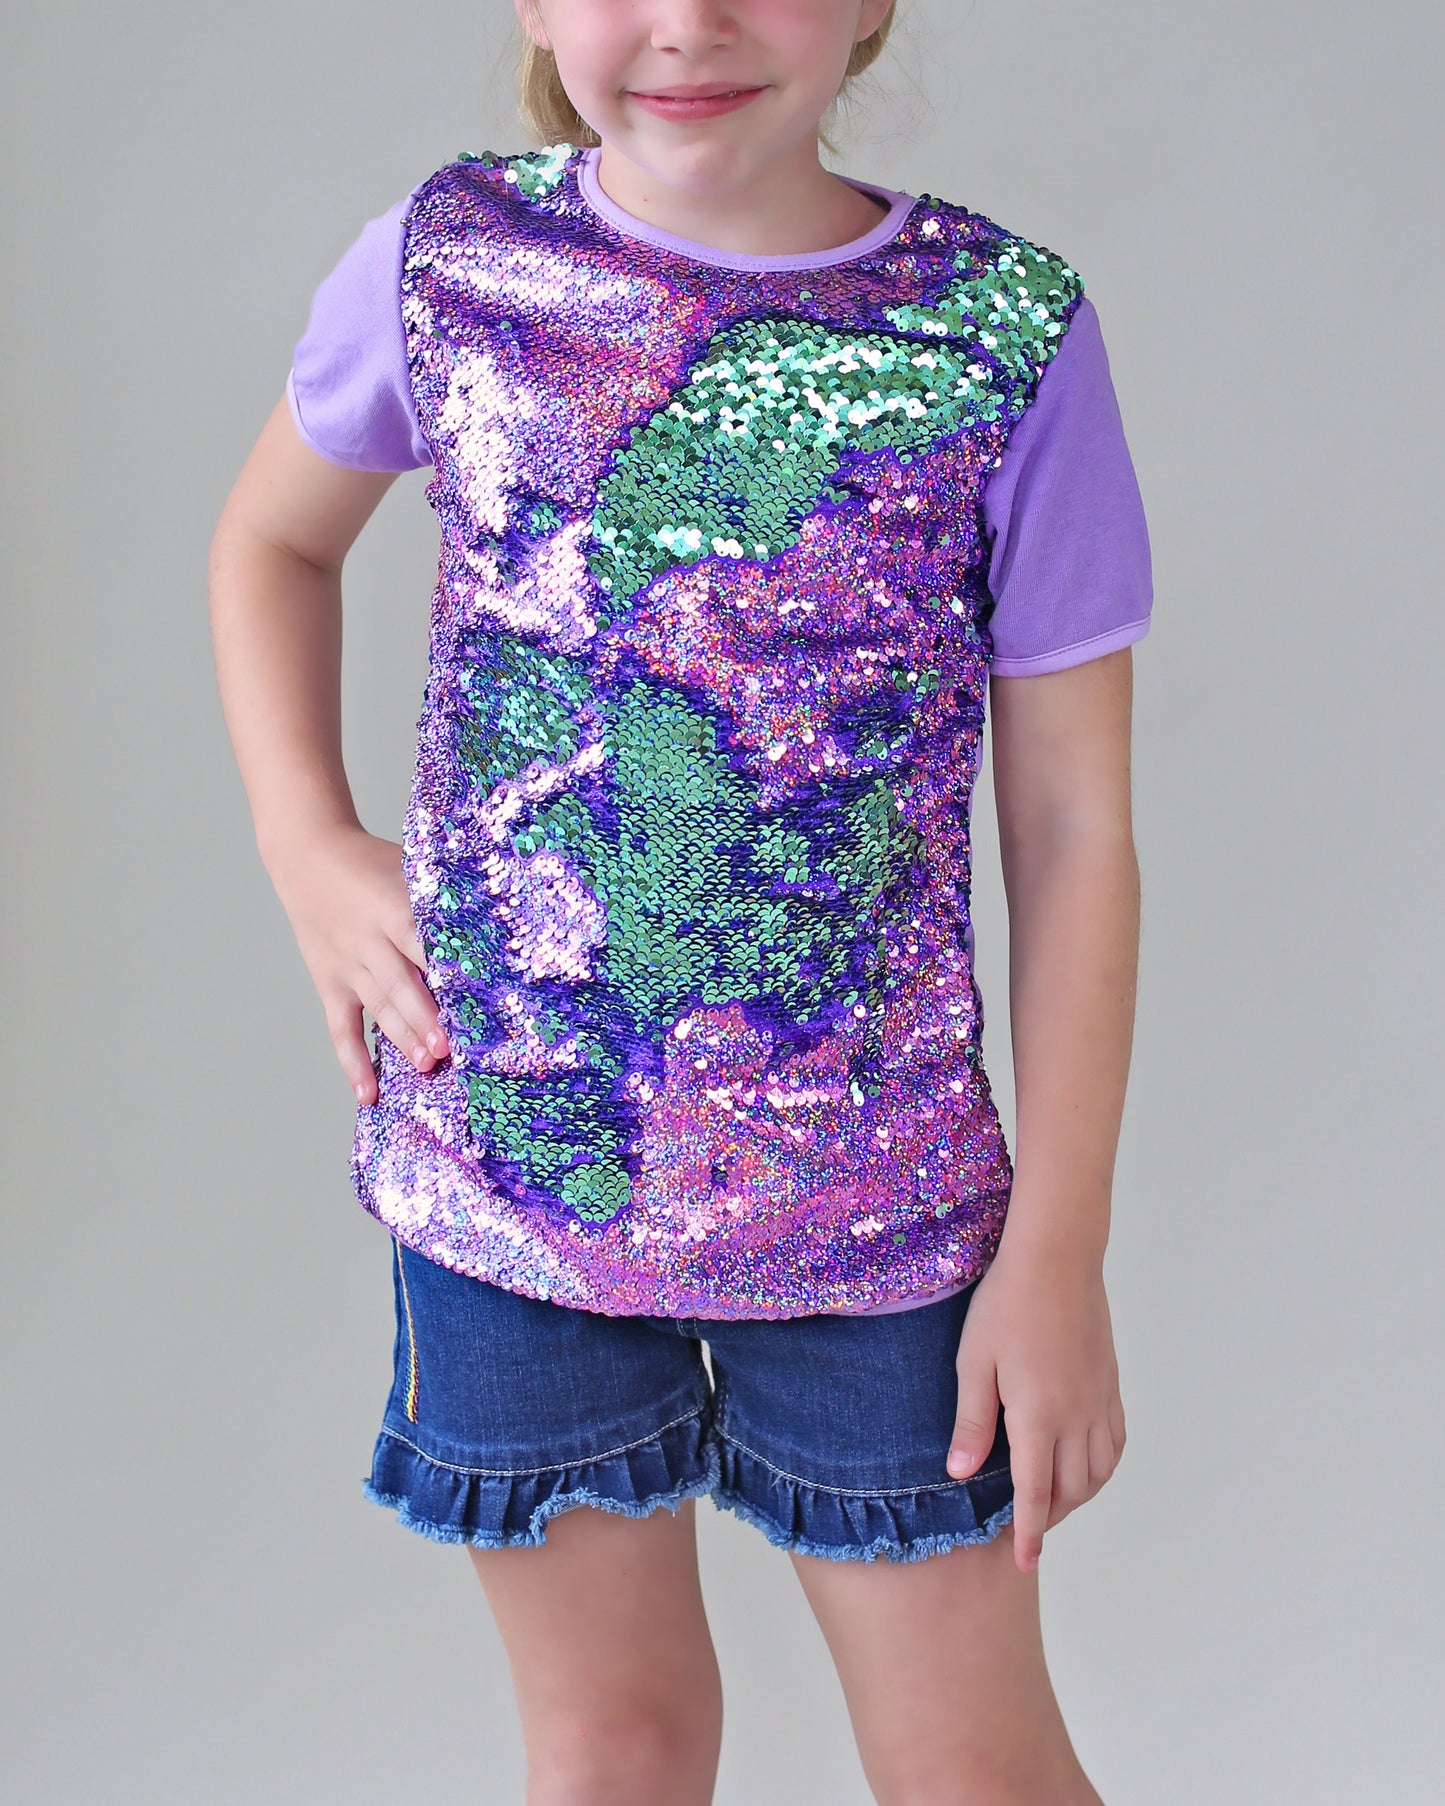 Mint and Lavender Reversible Sequined Shirt - Aqua and Purple flip Sequin Shirt - Lavender/MintSequined Shirt - Magic Sequin Shirt